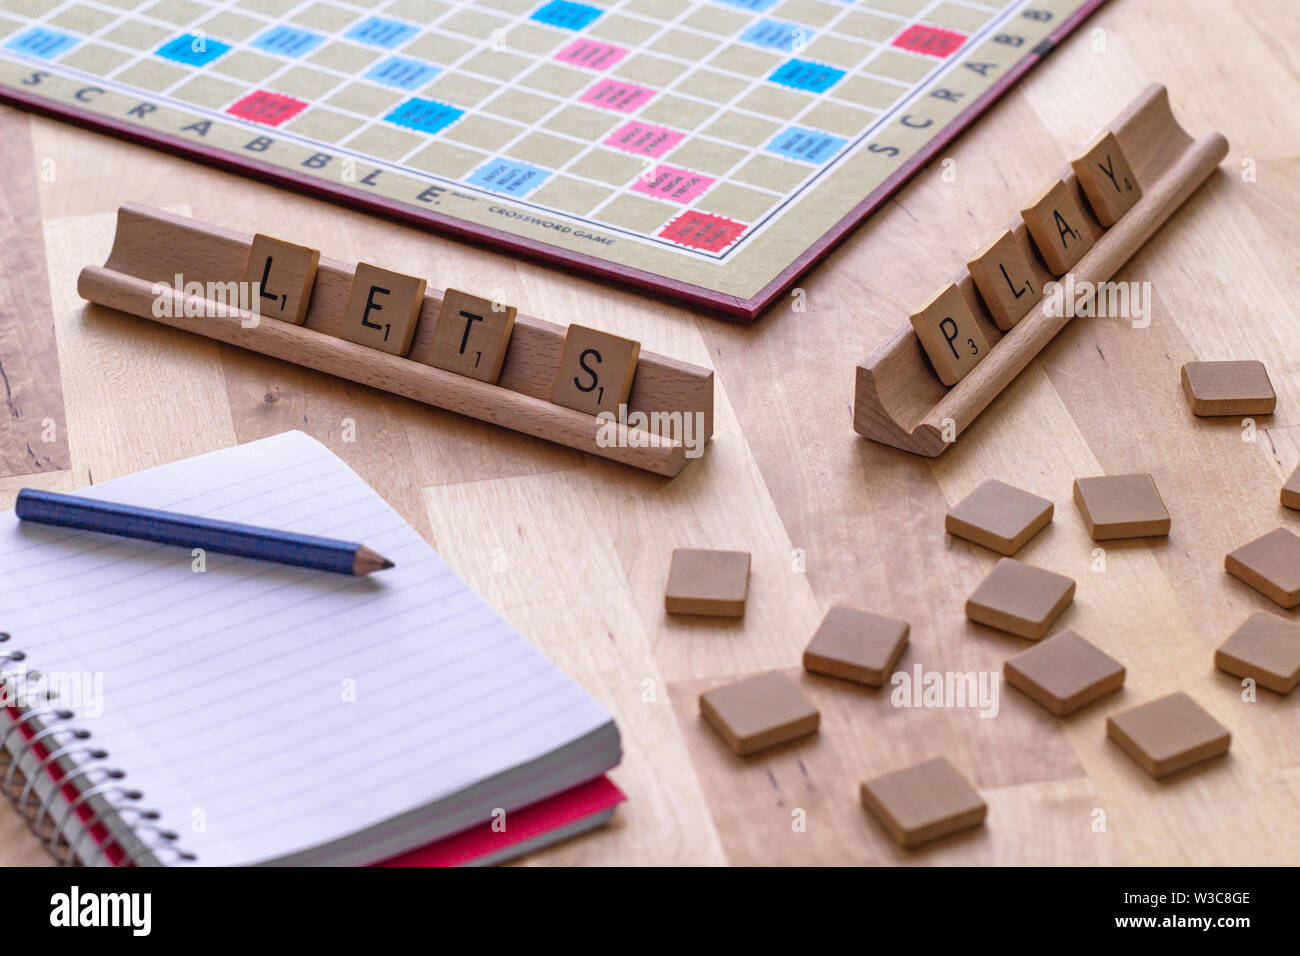 Scrabble board game with the scrabble tile spell "Lets Play" Stock Photo